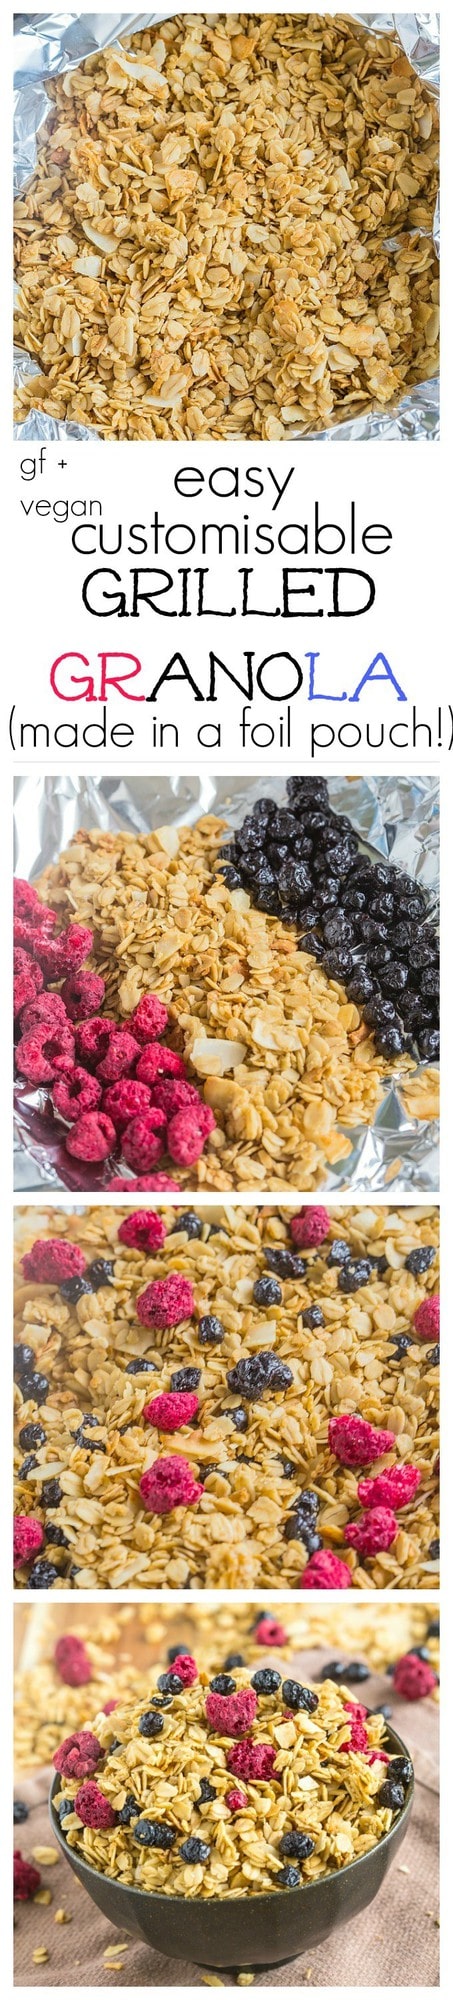 Easy (and healthy!) Grilled Granola- Customisable + can be made stovetop! Vegan, GF + Allergy friendly! @thebigmansworld - thebigmansworld.com